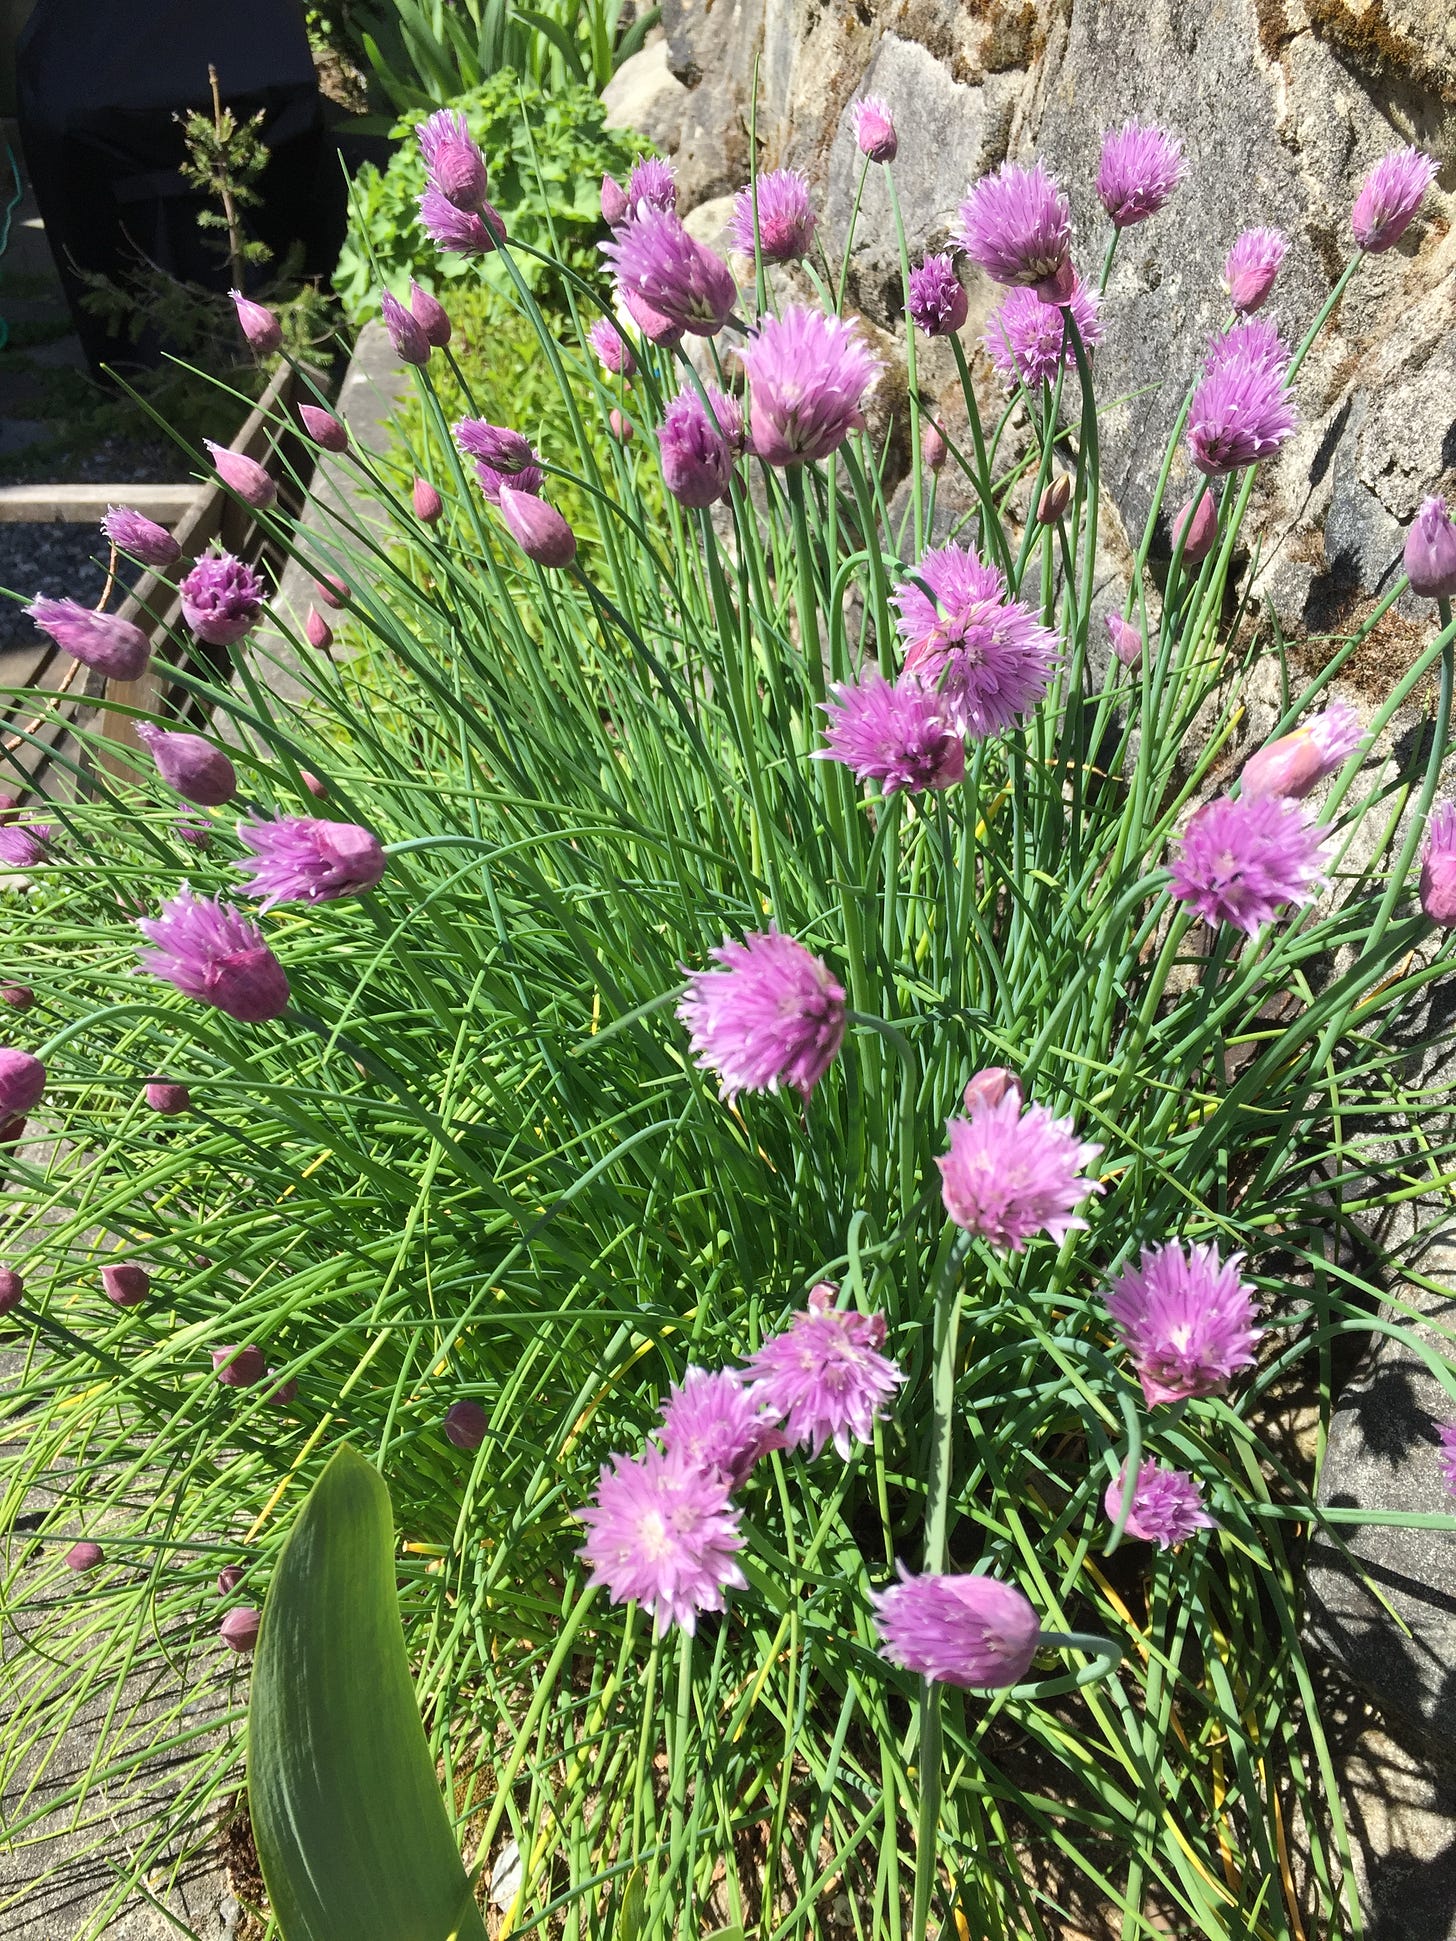 a section of a rock wall garden, showing a large bunch of chives with purple blossoms.